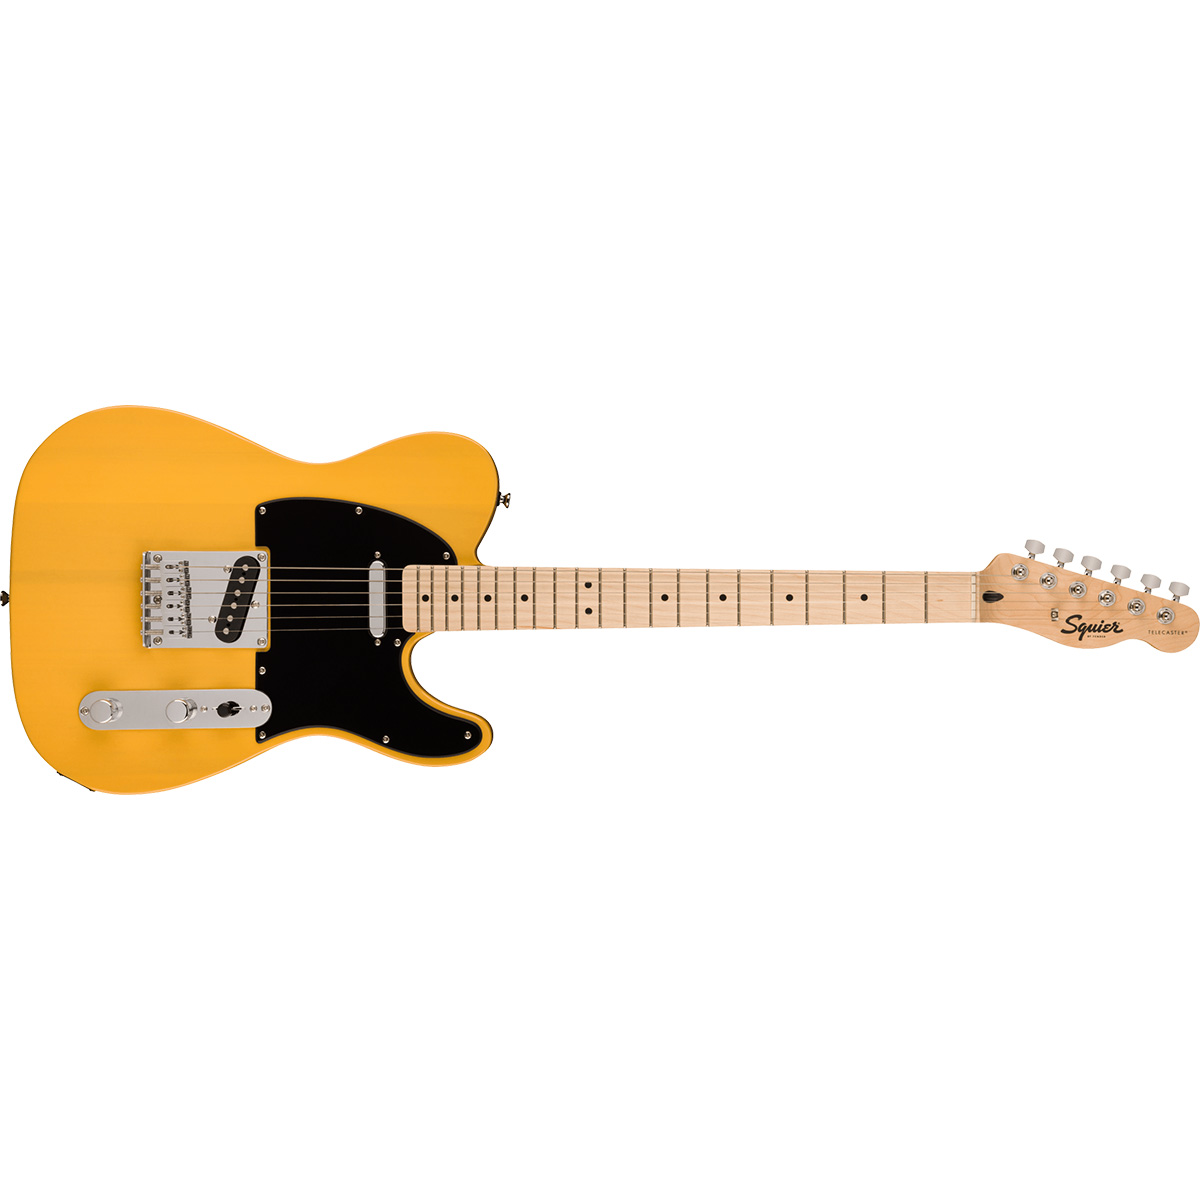 SQUIER Telecaster by Fender エレキギター\nLaエレキギター